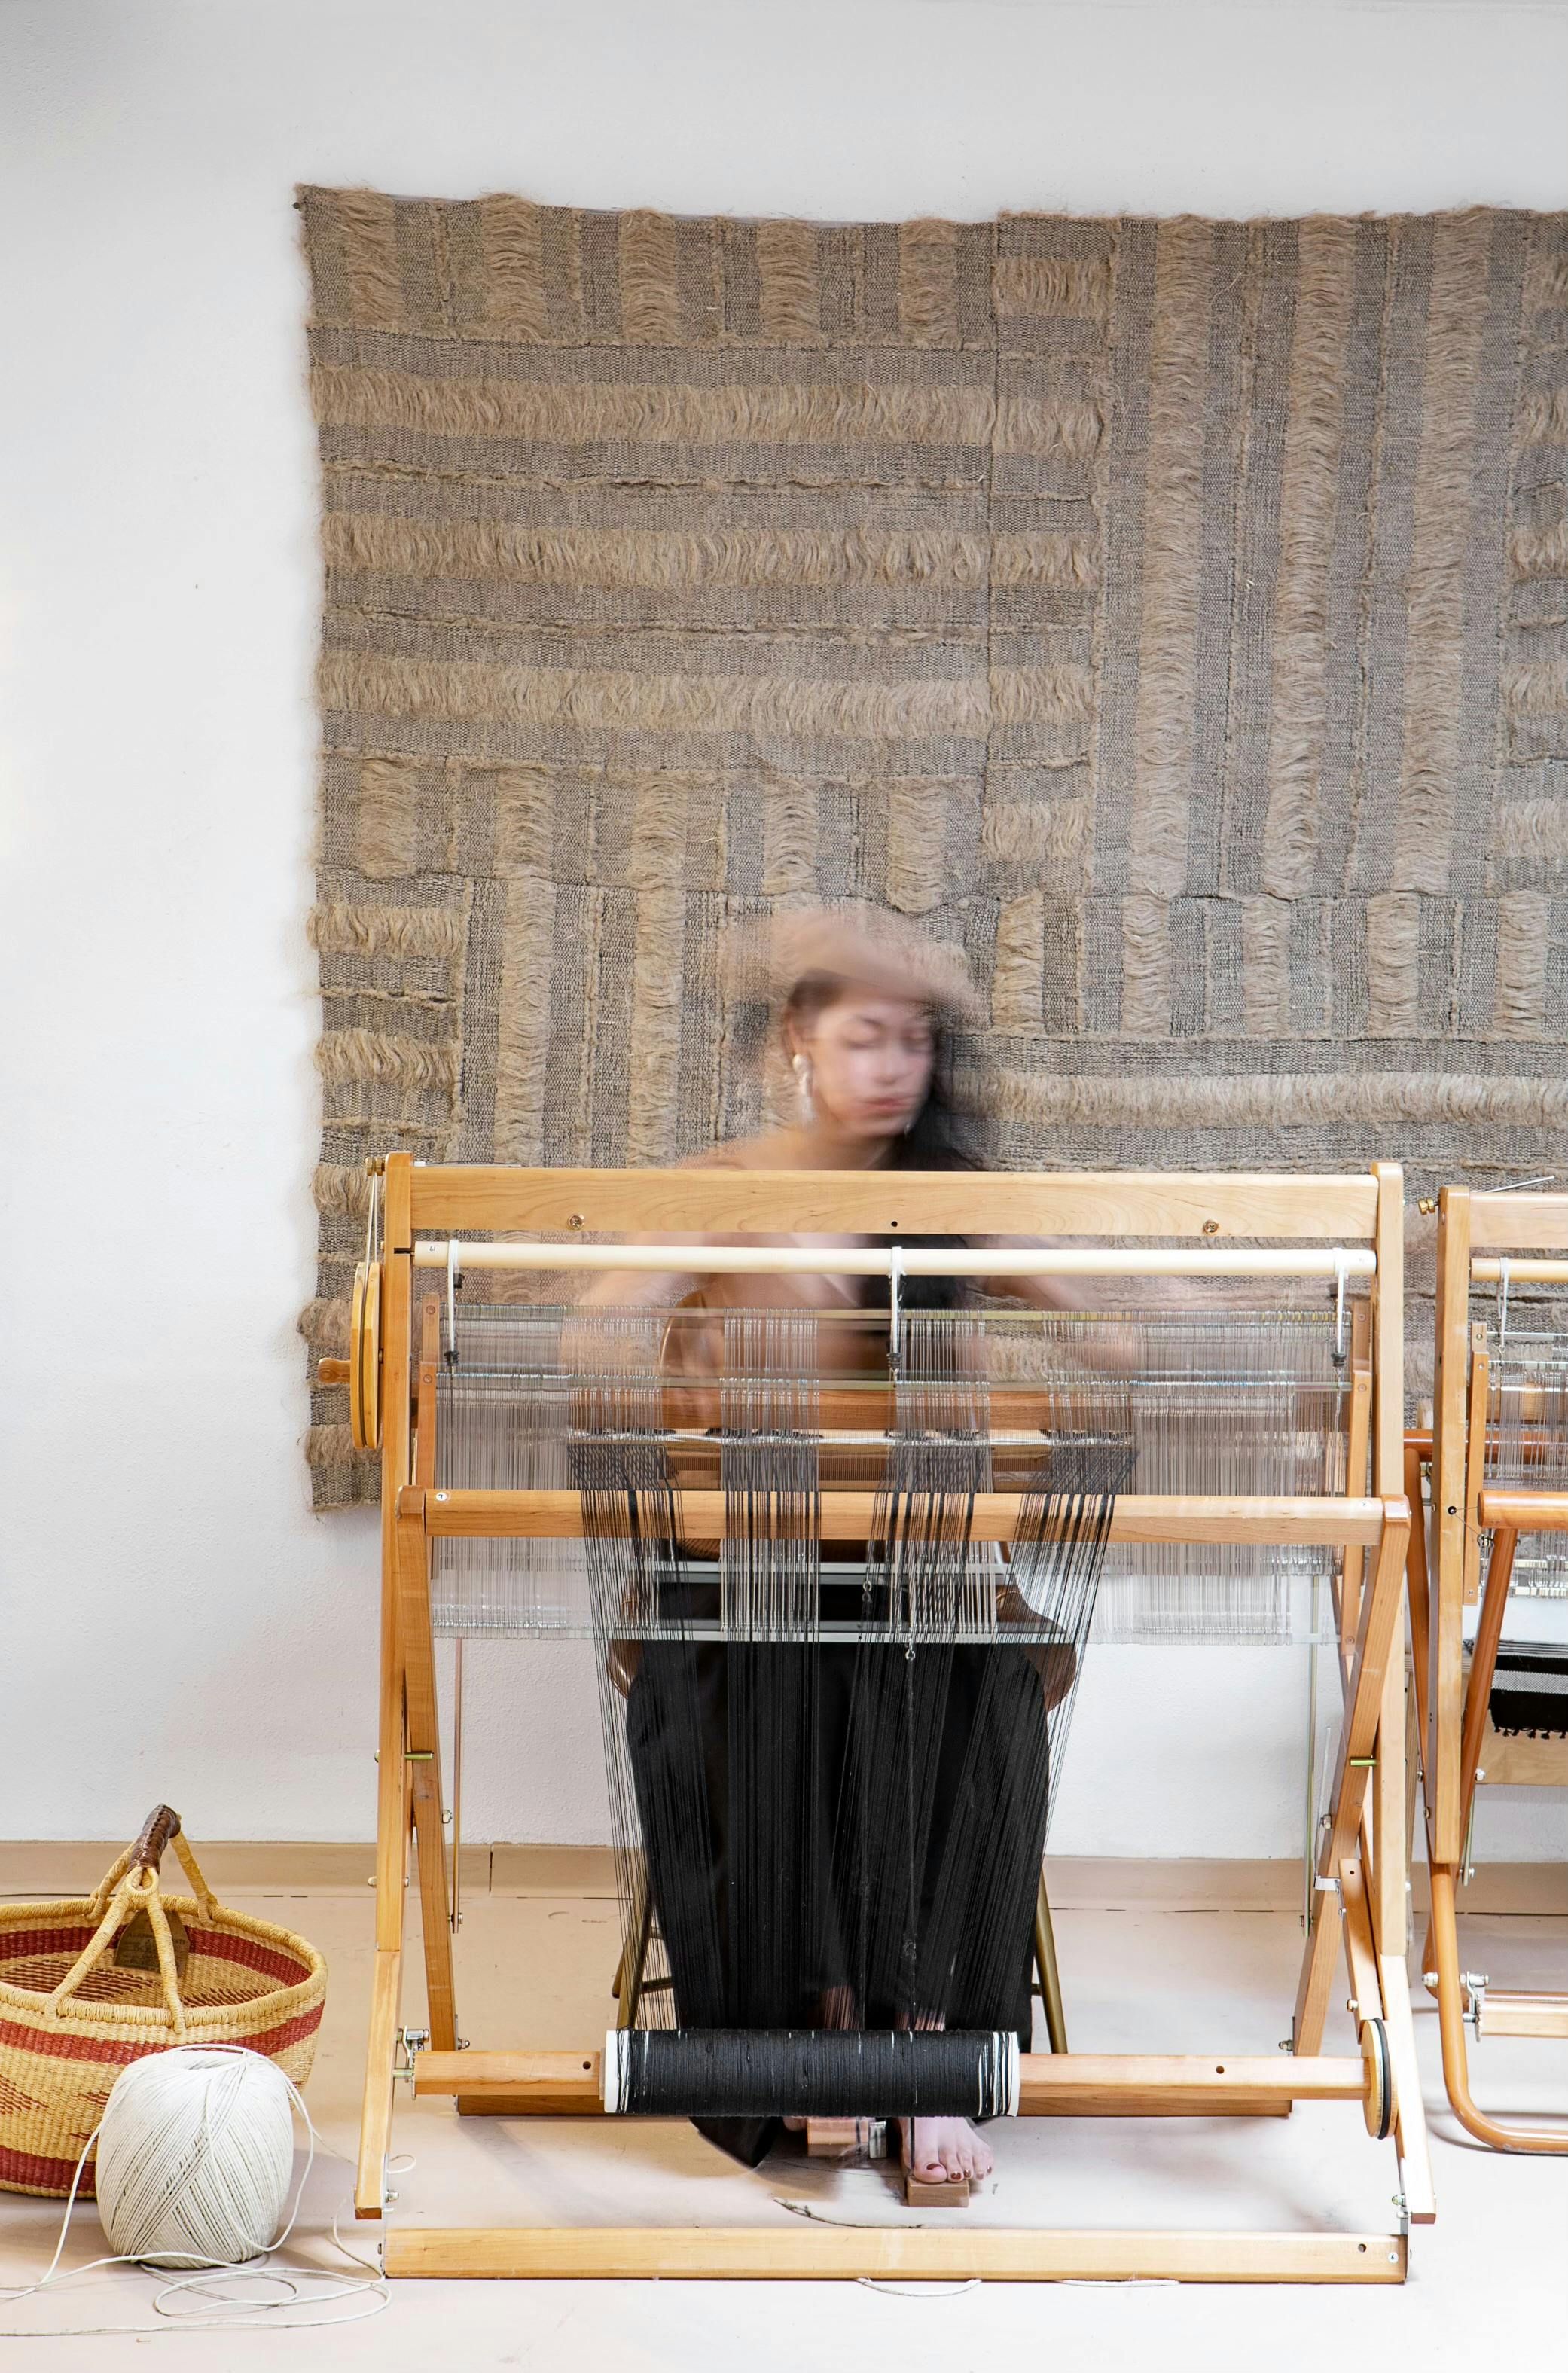 textile artist blurred in motion as they work at a loom. A finished beige piece hangs on the wall behind them